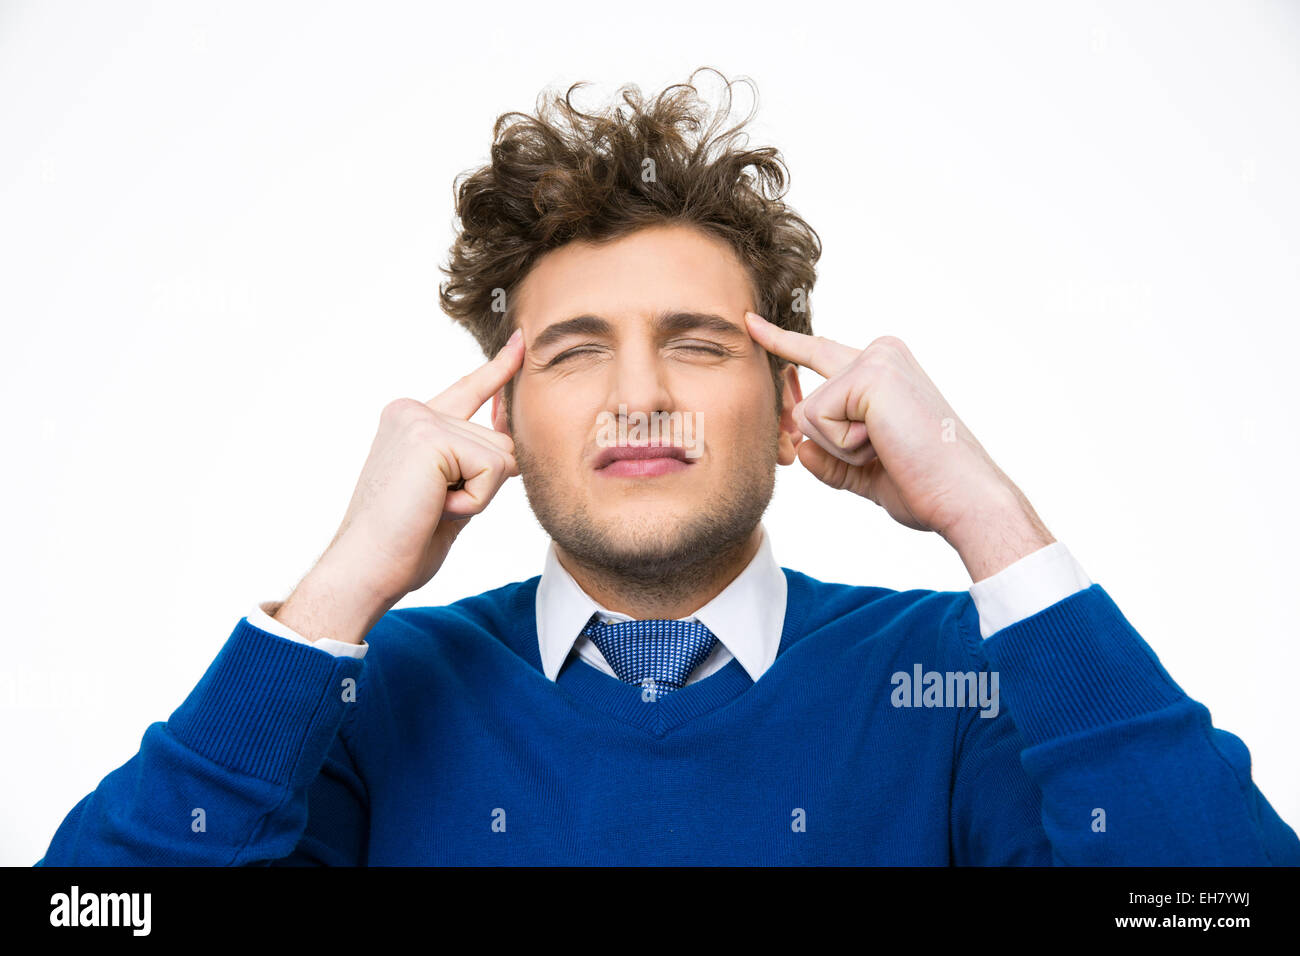 Pensive man with curly hair isolated on a white background Stock Photo